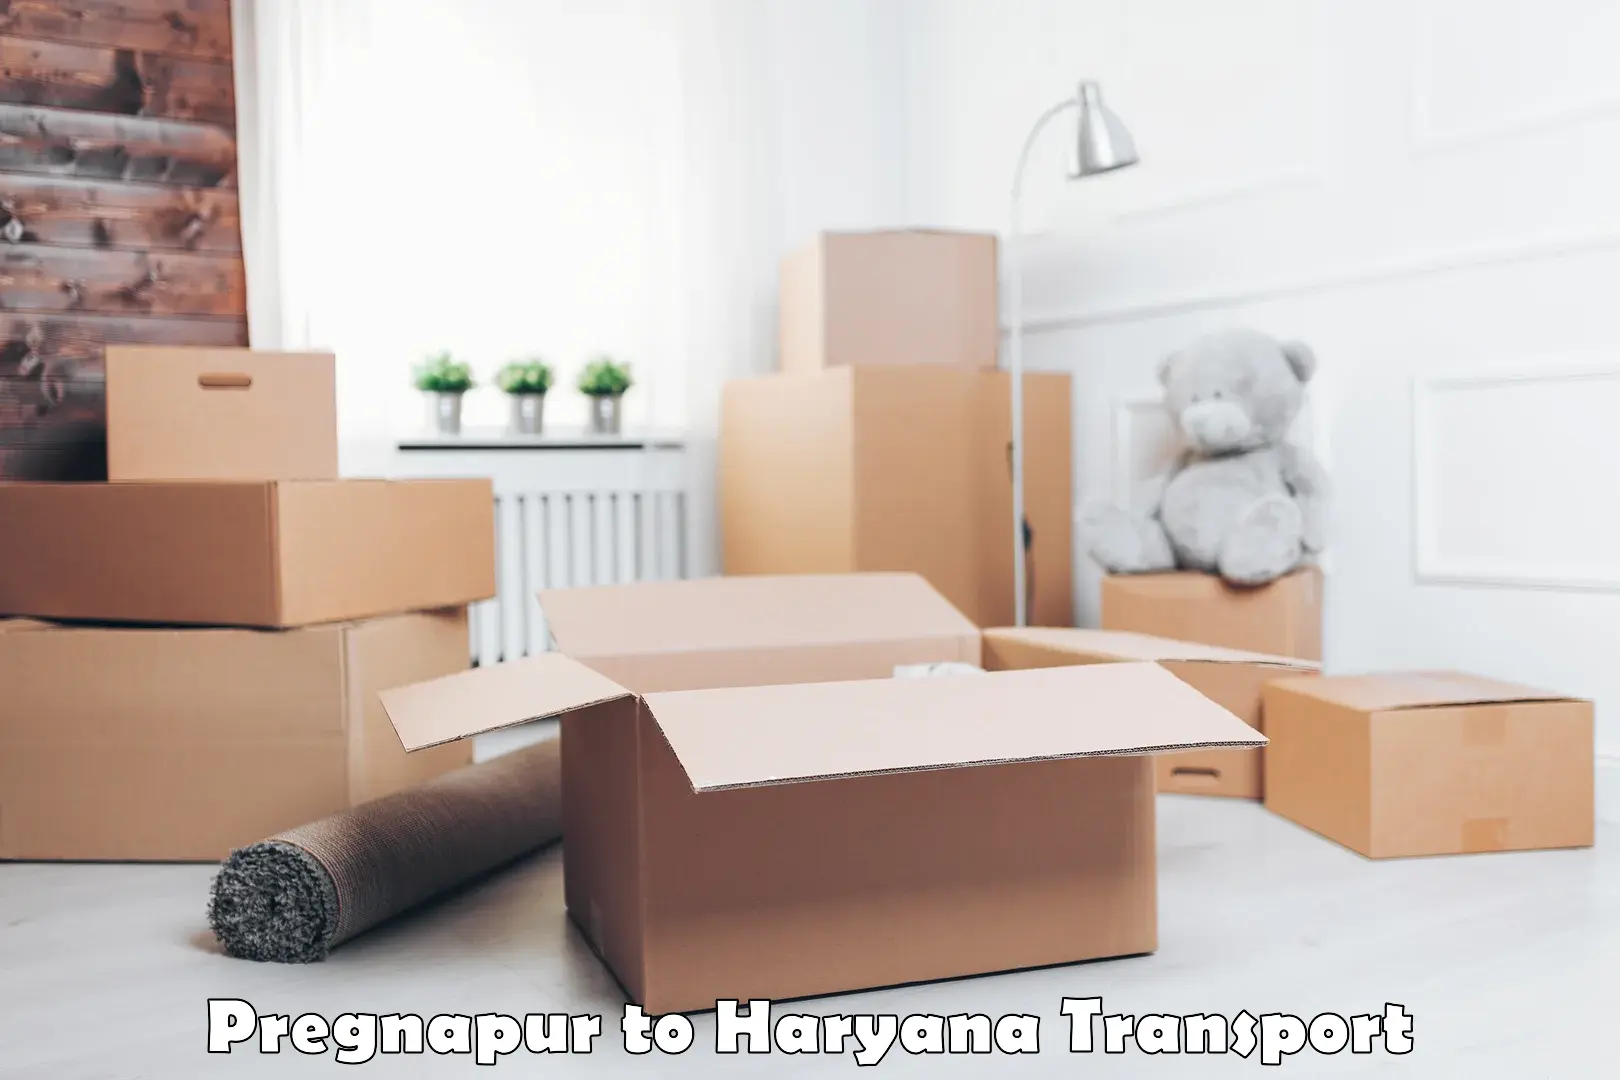 Goods delivery service Pregnapur to Palwal